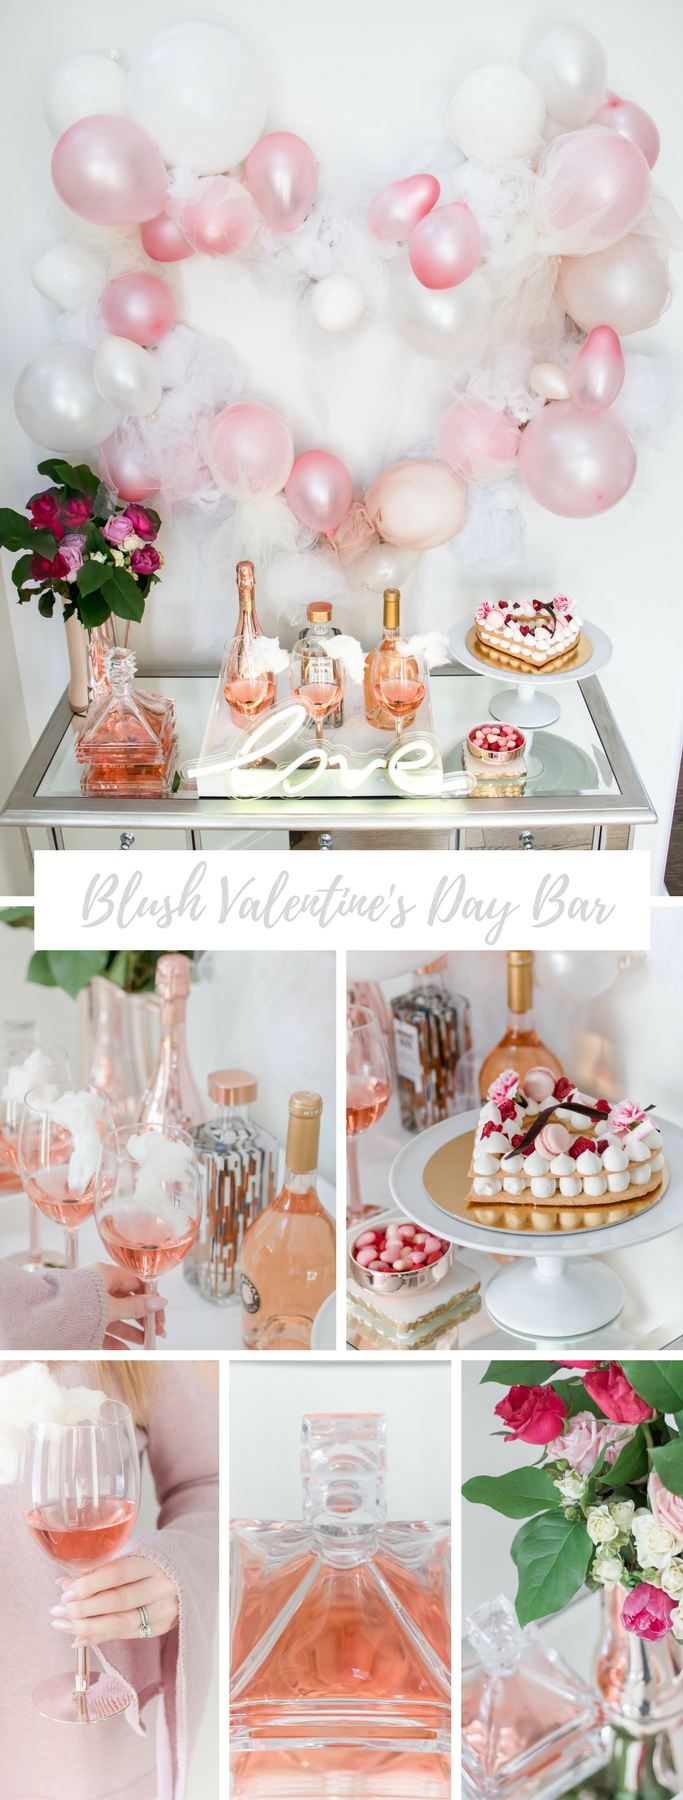 Blush pink Valentine's Day bar with tulle balloon heart and swoon worthy rose details